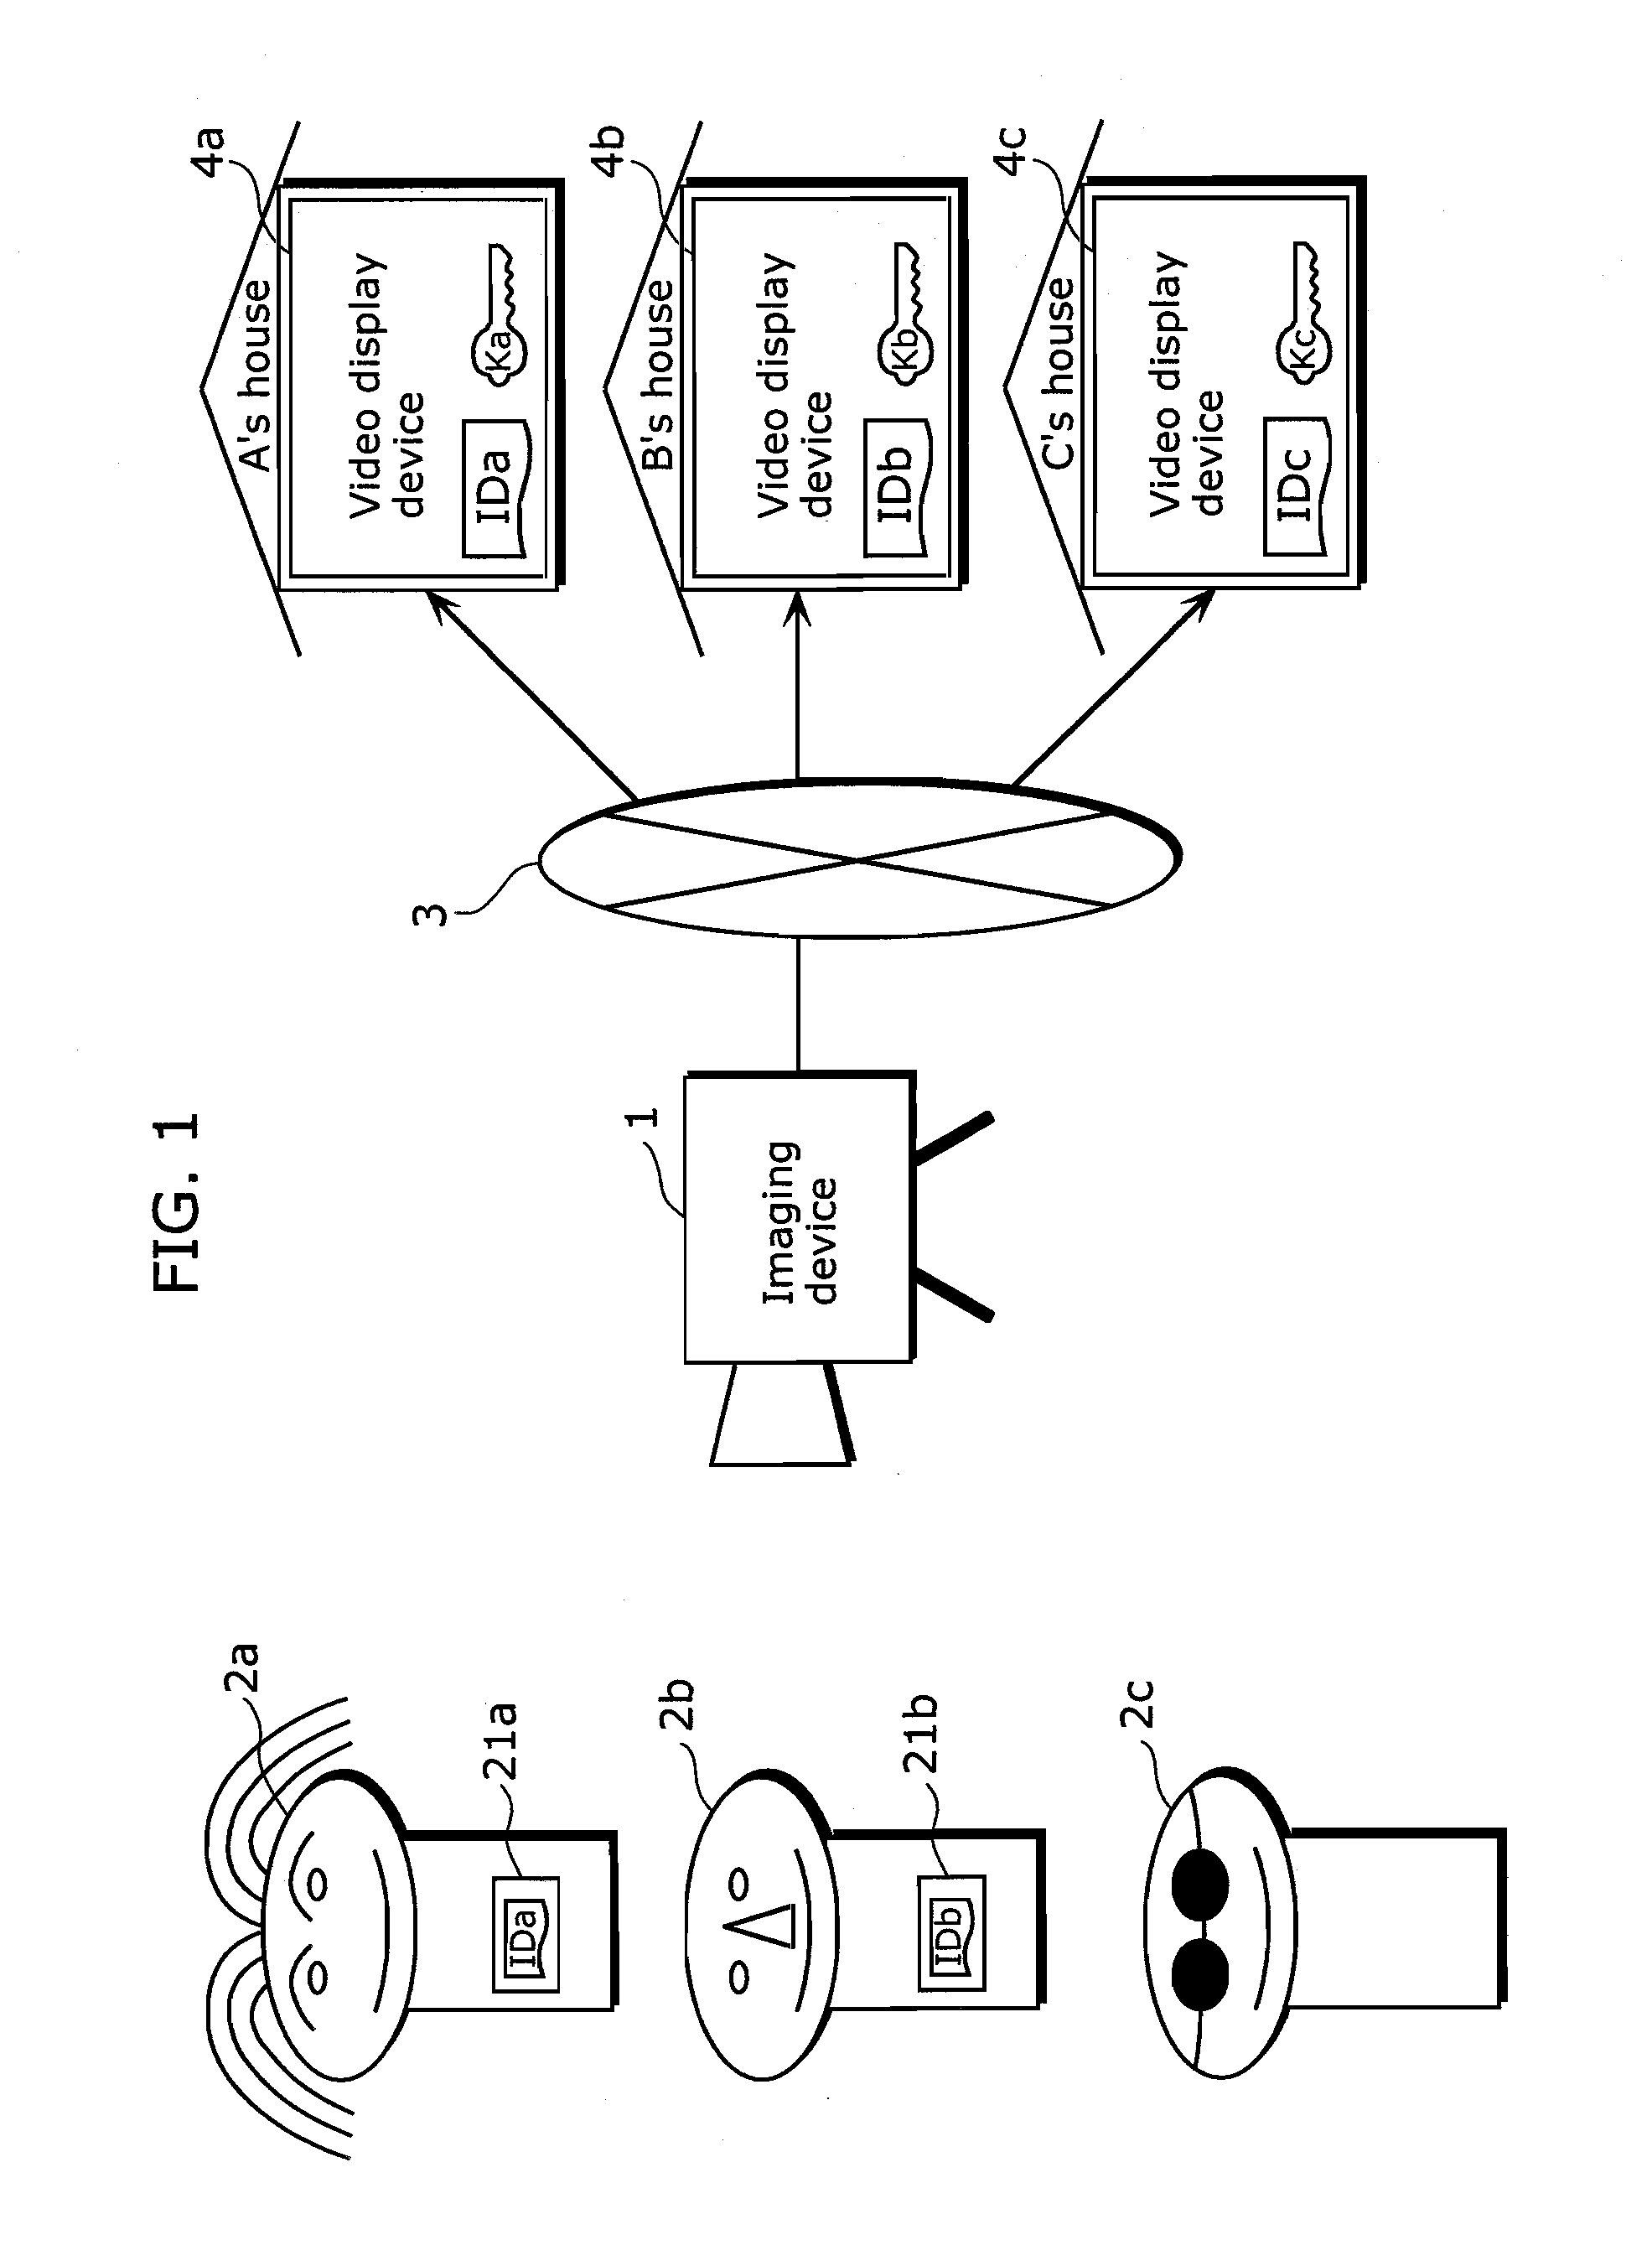 Monitoring camera system, imaging device, and video display device